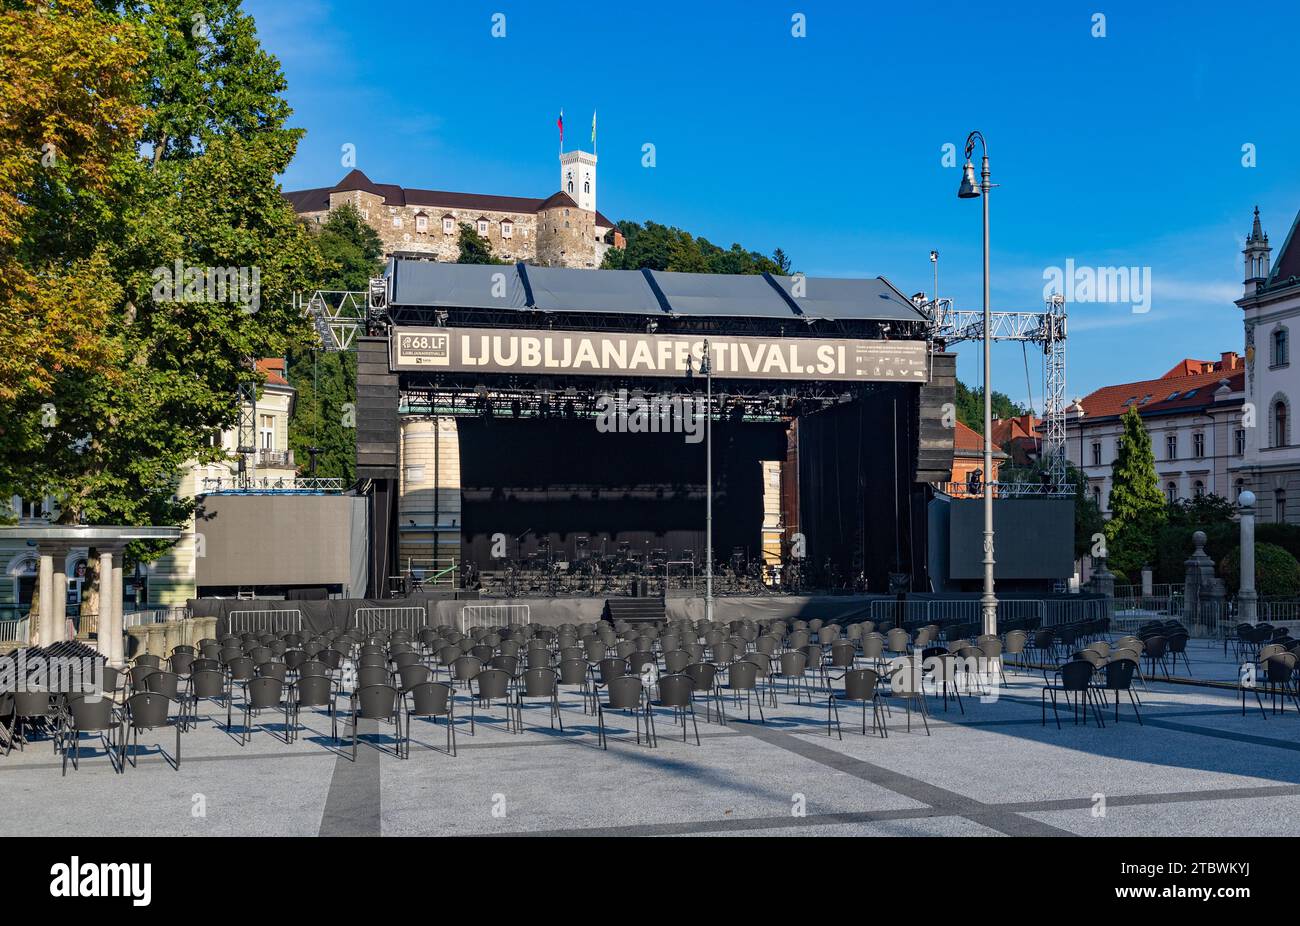 A picture of a stage at the Congress Square for the Ljubljana Festival Stock Photo